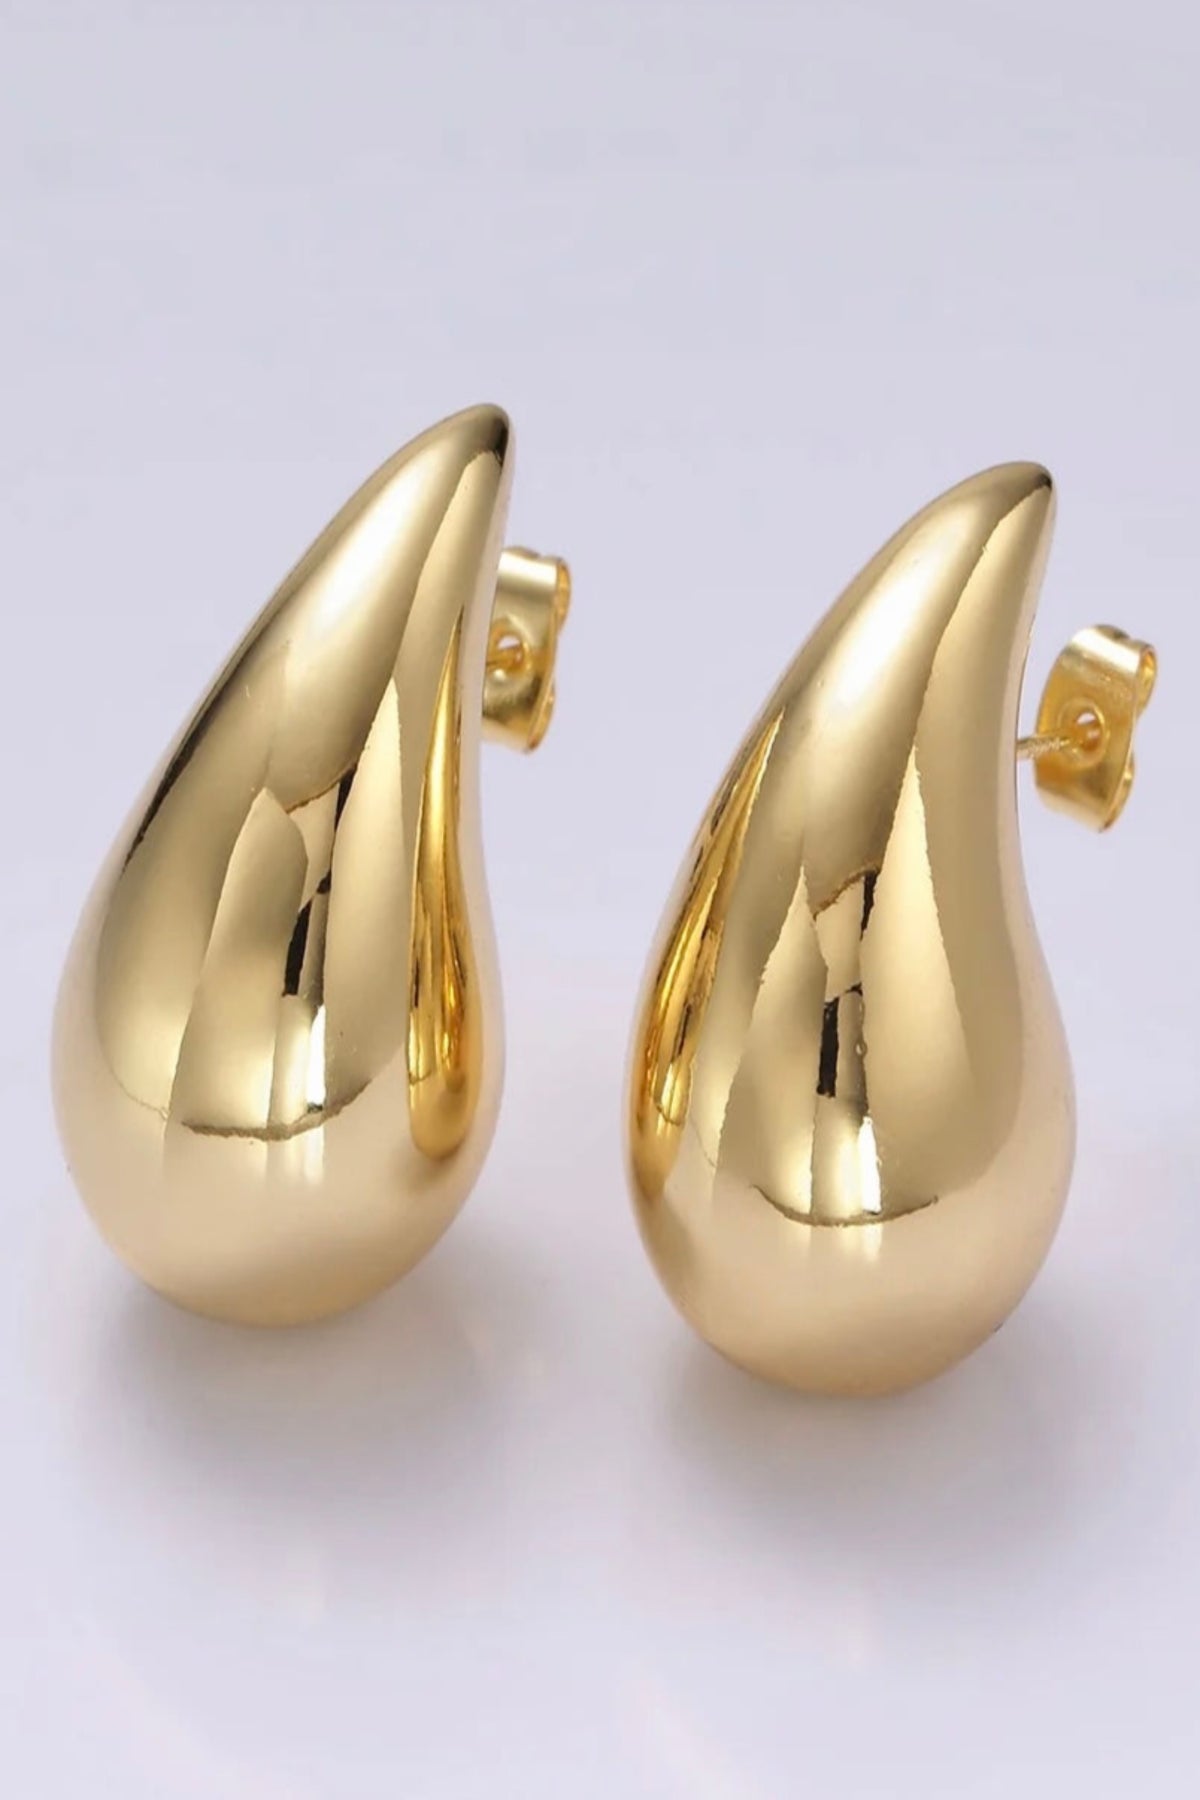 &quot;Gold Filled Tear drop earrings Kylie Jenner style dupe chunky earring.&quot;